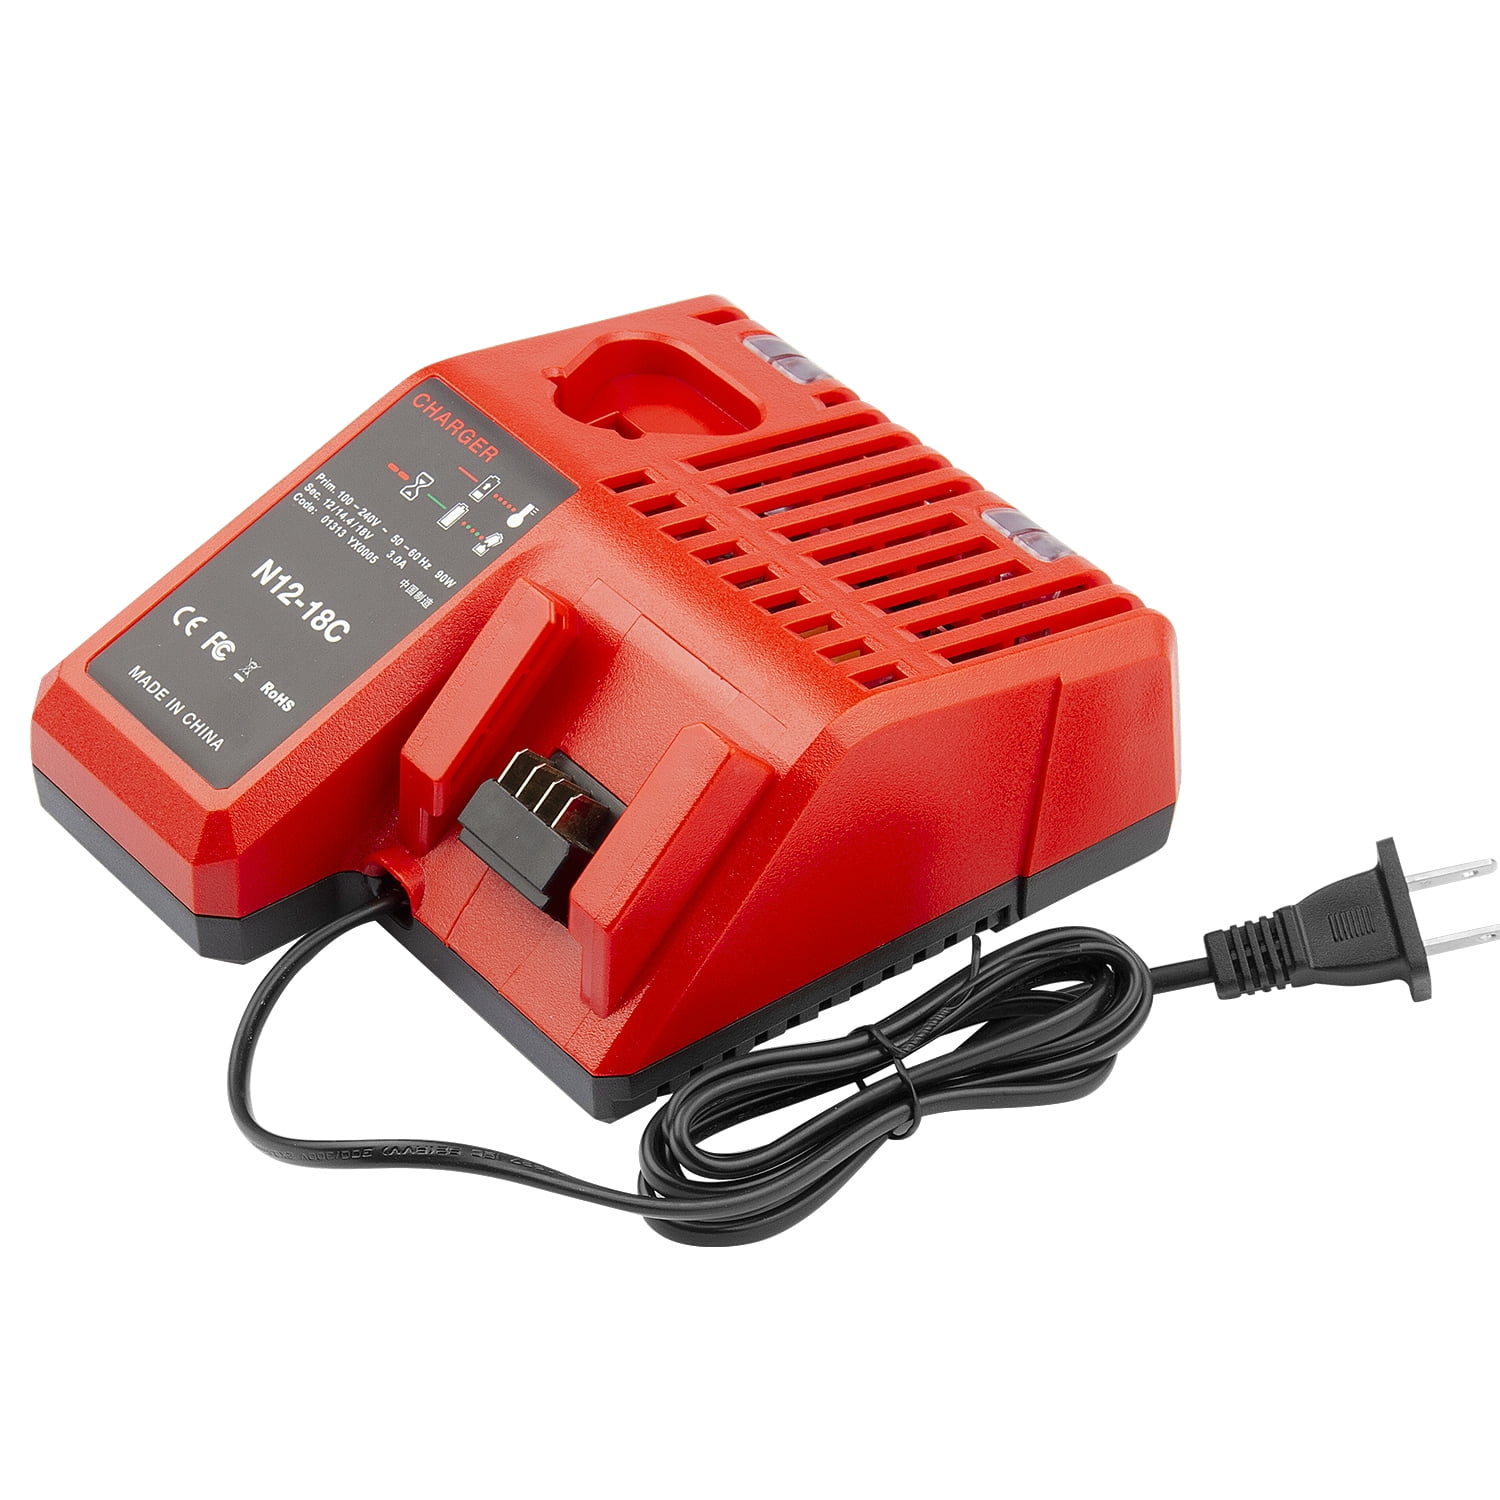 Replacement for M12 & M18 Multi-Voltage Battery Charger Compatible with Milwaukee M12 M14 M18 Lithium Battery 12V-18V 48-11-2412 48-11-2401 48-11-2440 48-11-1862 48-11-1850 48-11-1852 